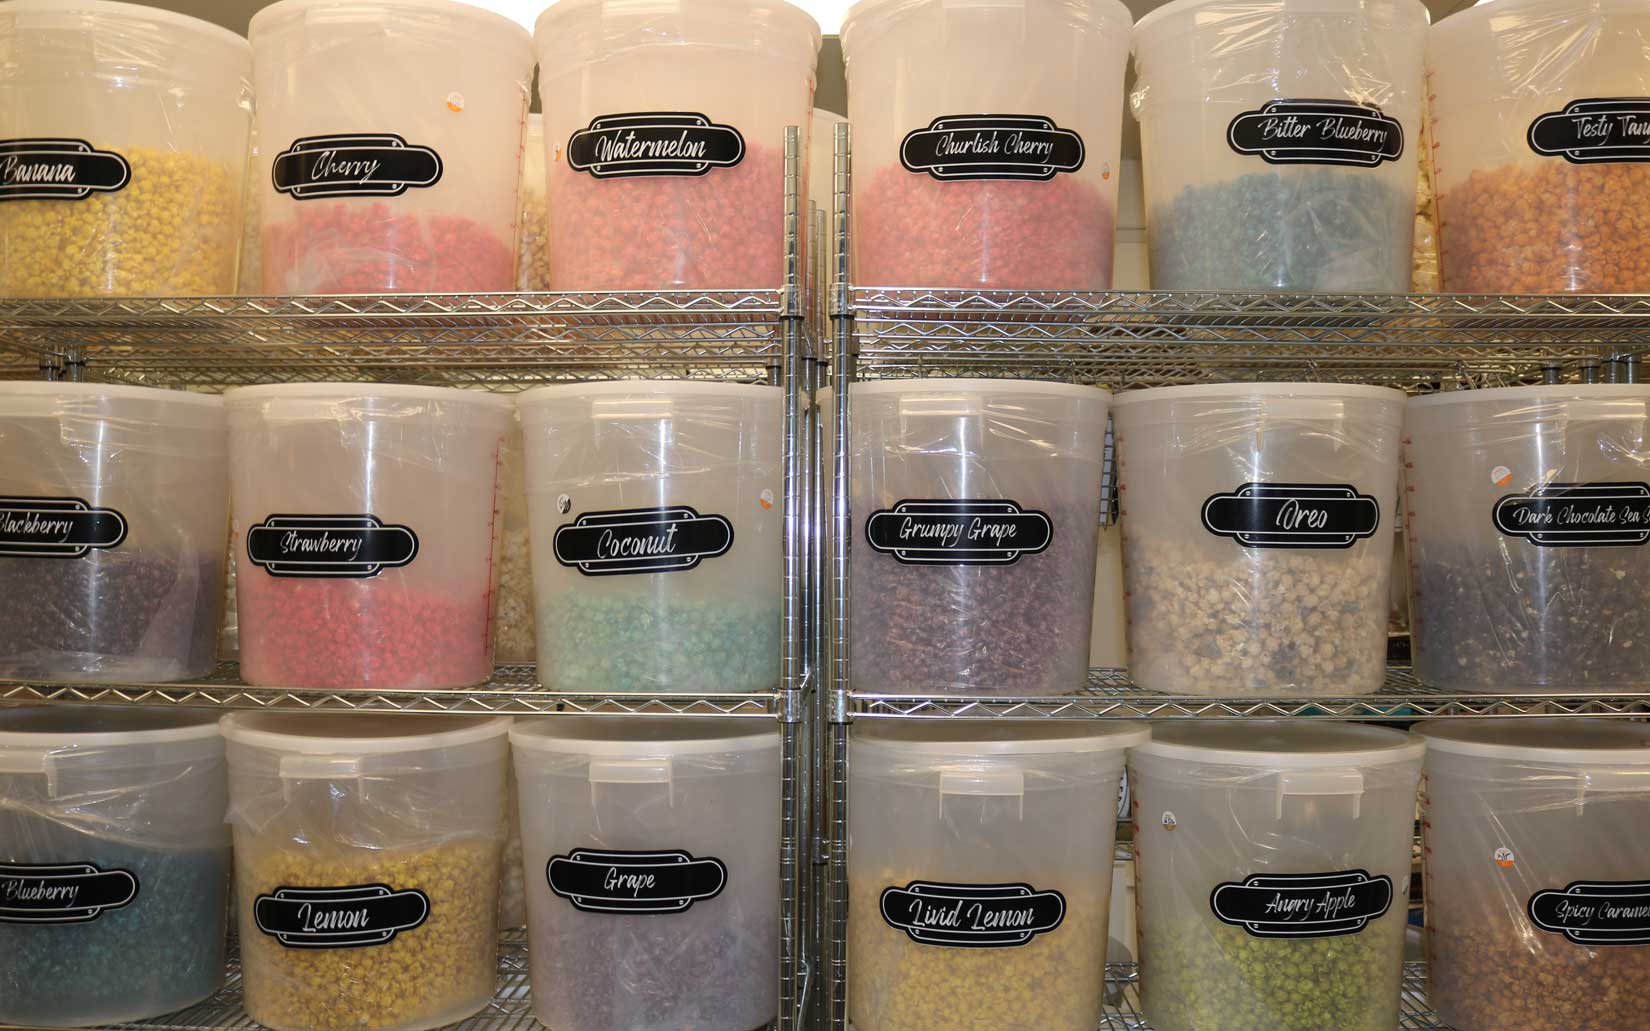 We have a wide selection of popcorn flavors, prepared daily.